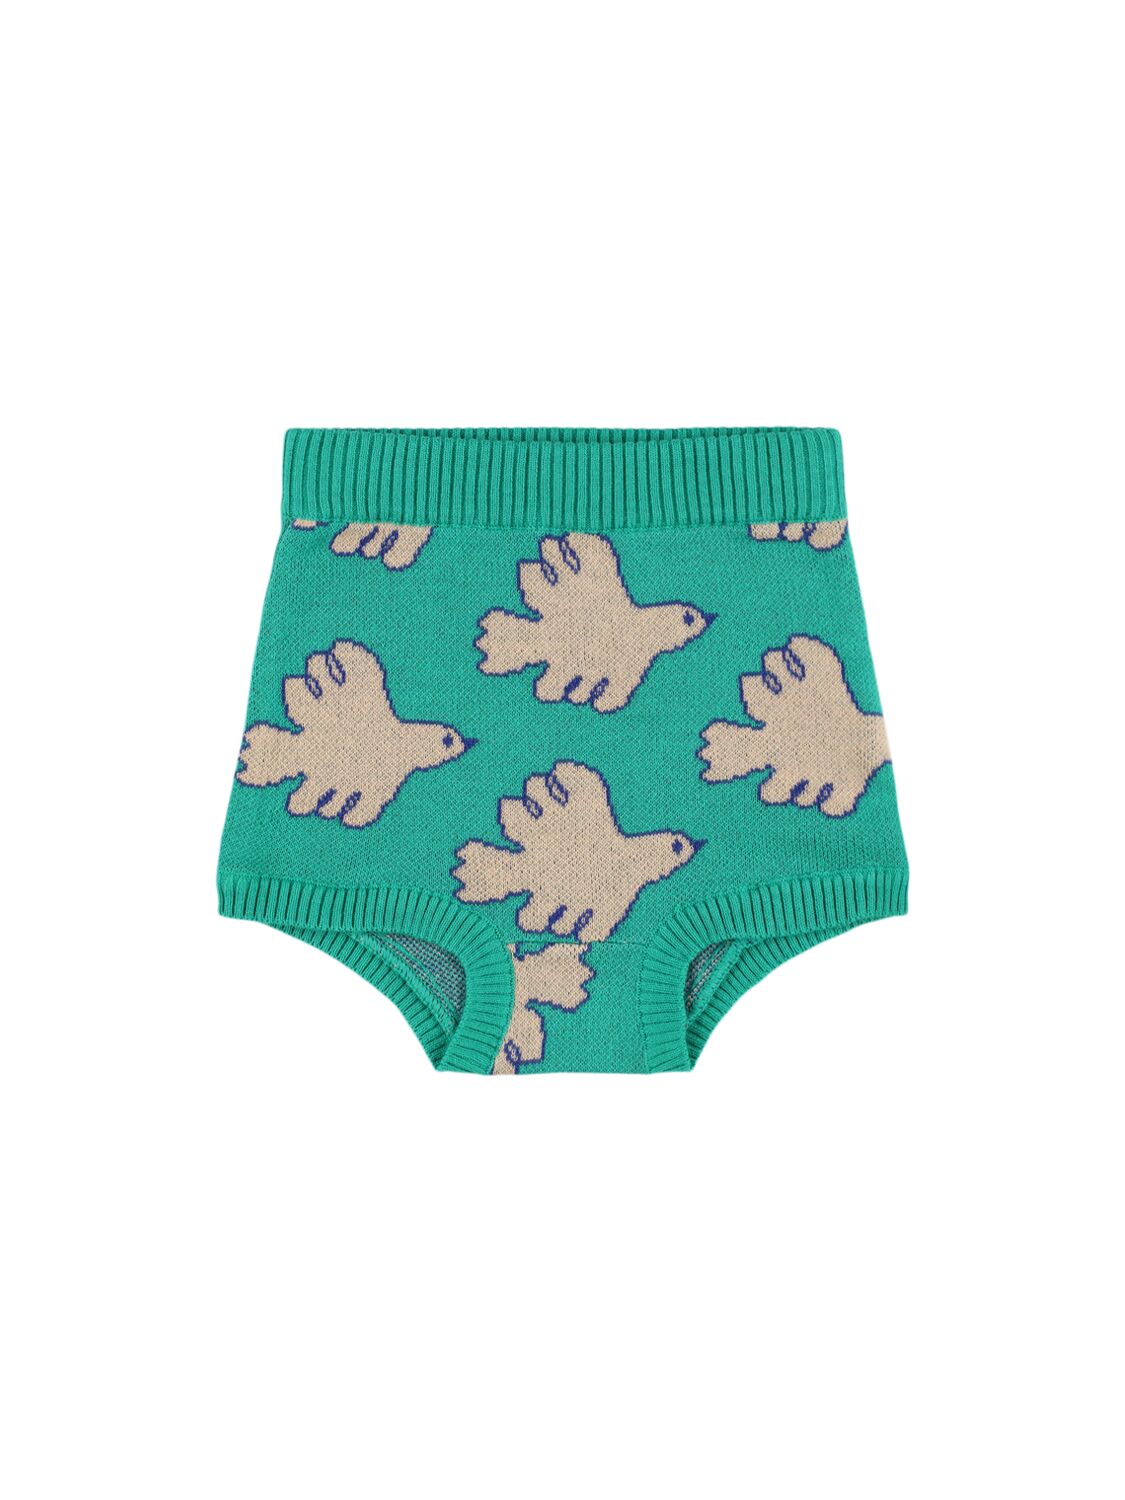 Tiny Cottons Babies' Intarsia Doves Cotton Knit Diaper Cover In Green